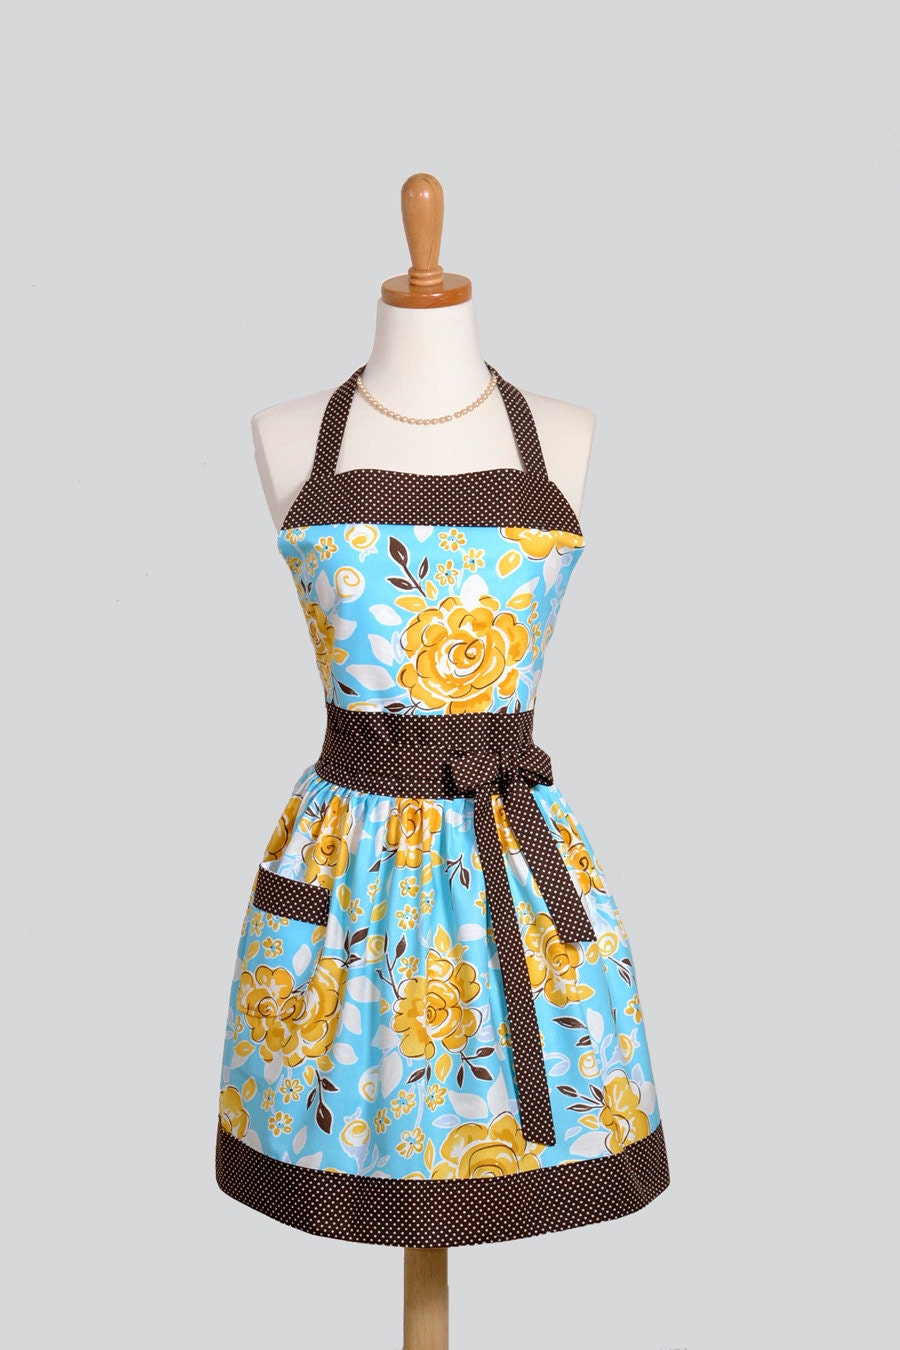 Womens Bib Apron - Yellow and Blue Tea Darjeeling Large Painted Floral with Brown Accents and Polka Dots